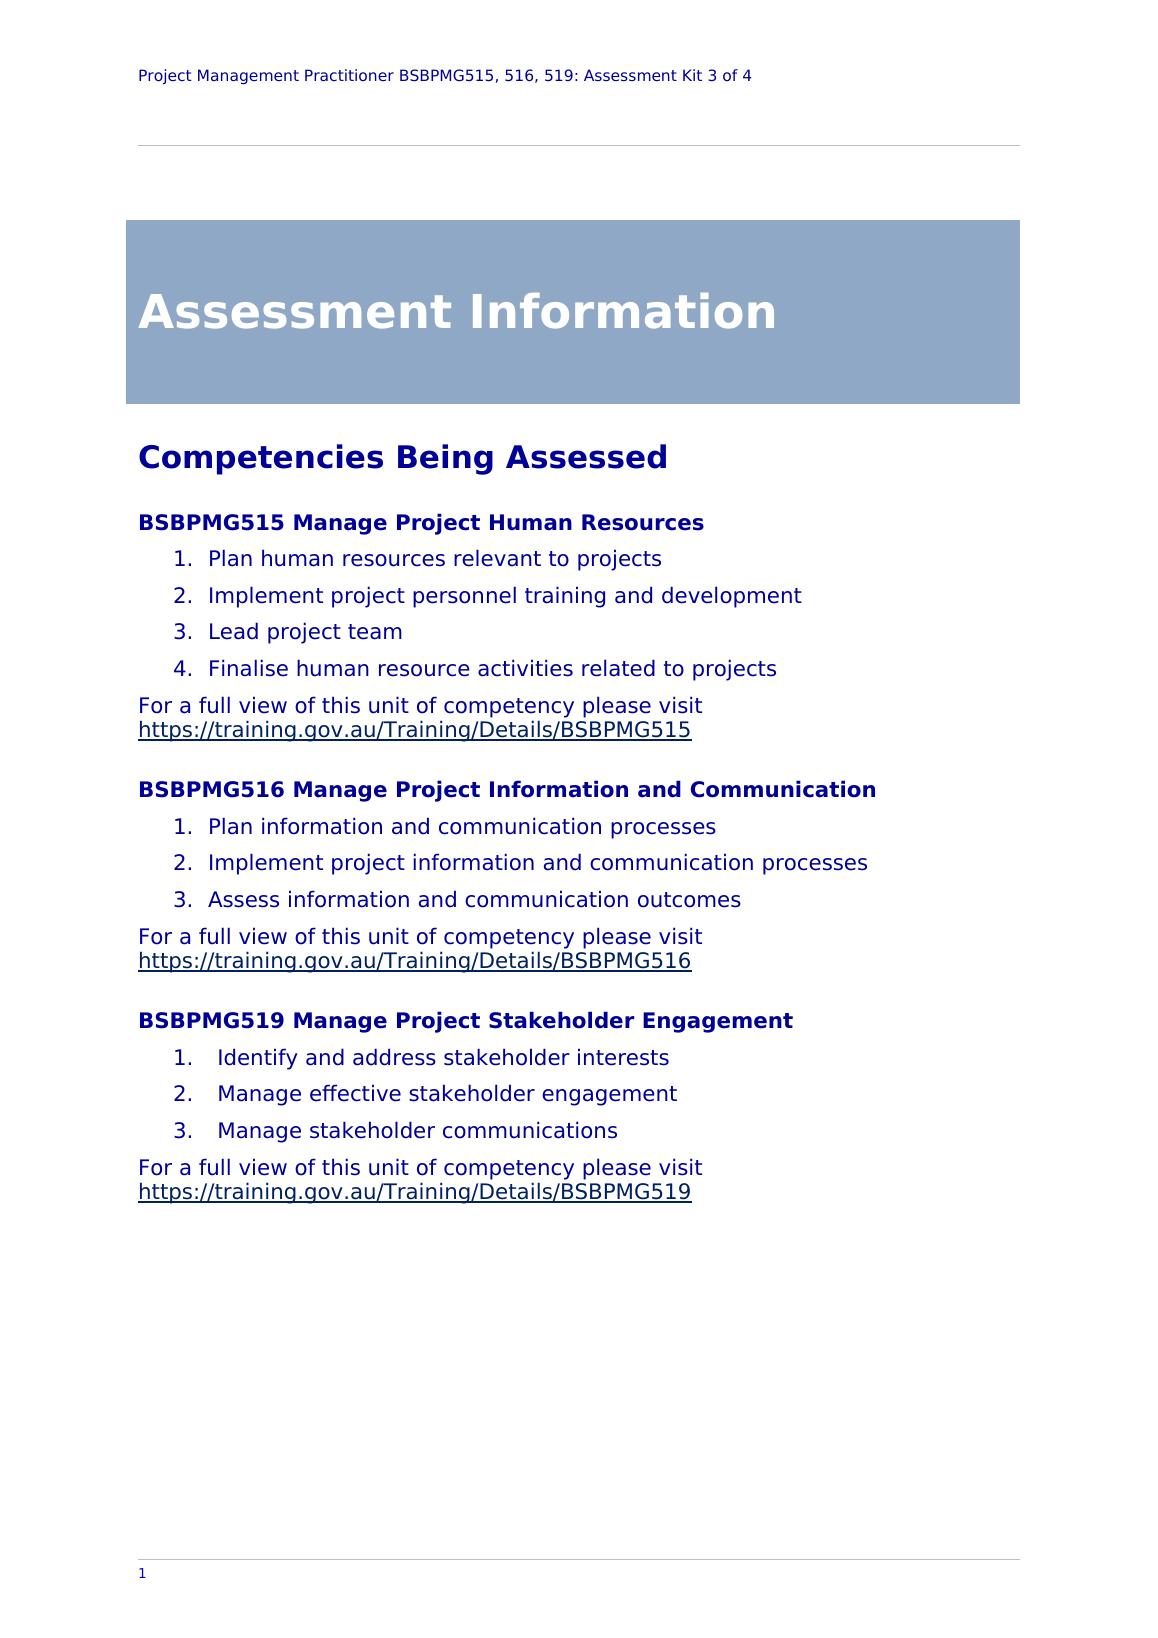 Project Management Practitioner BSBPMG515, 516, 519: Assessment Kit 3 of 4_4